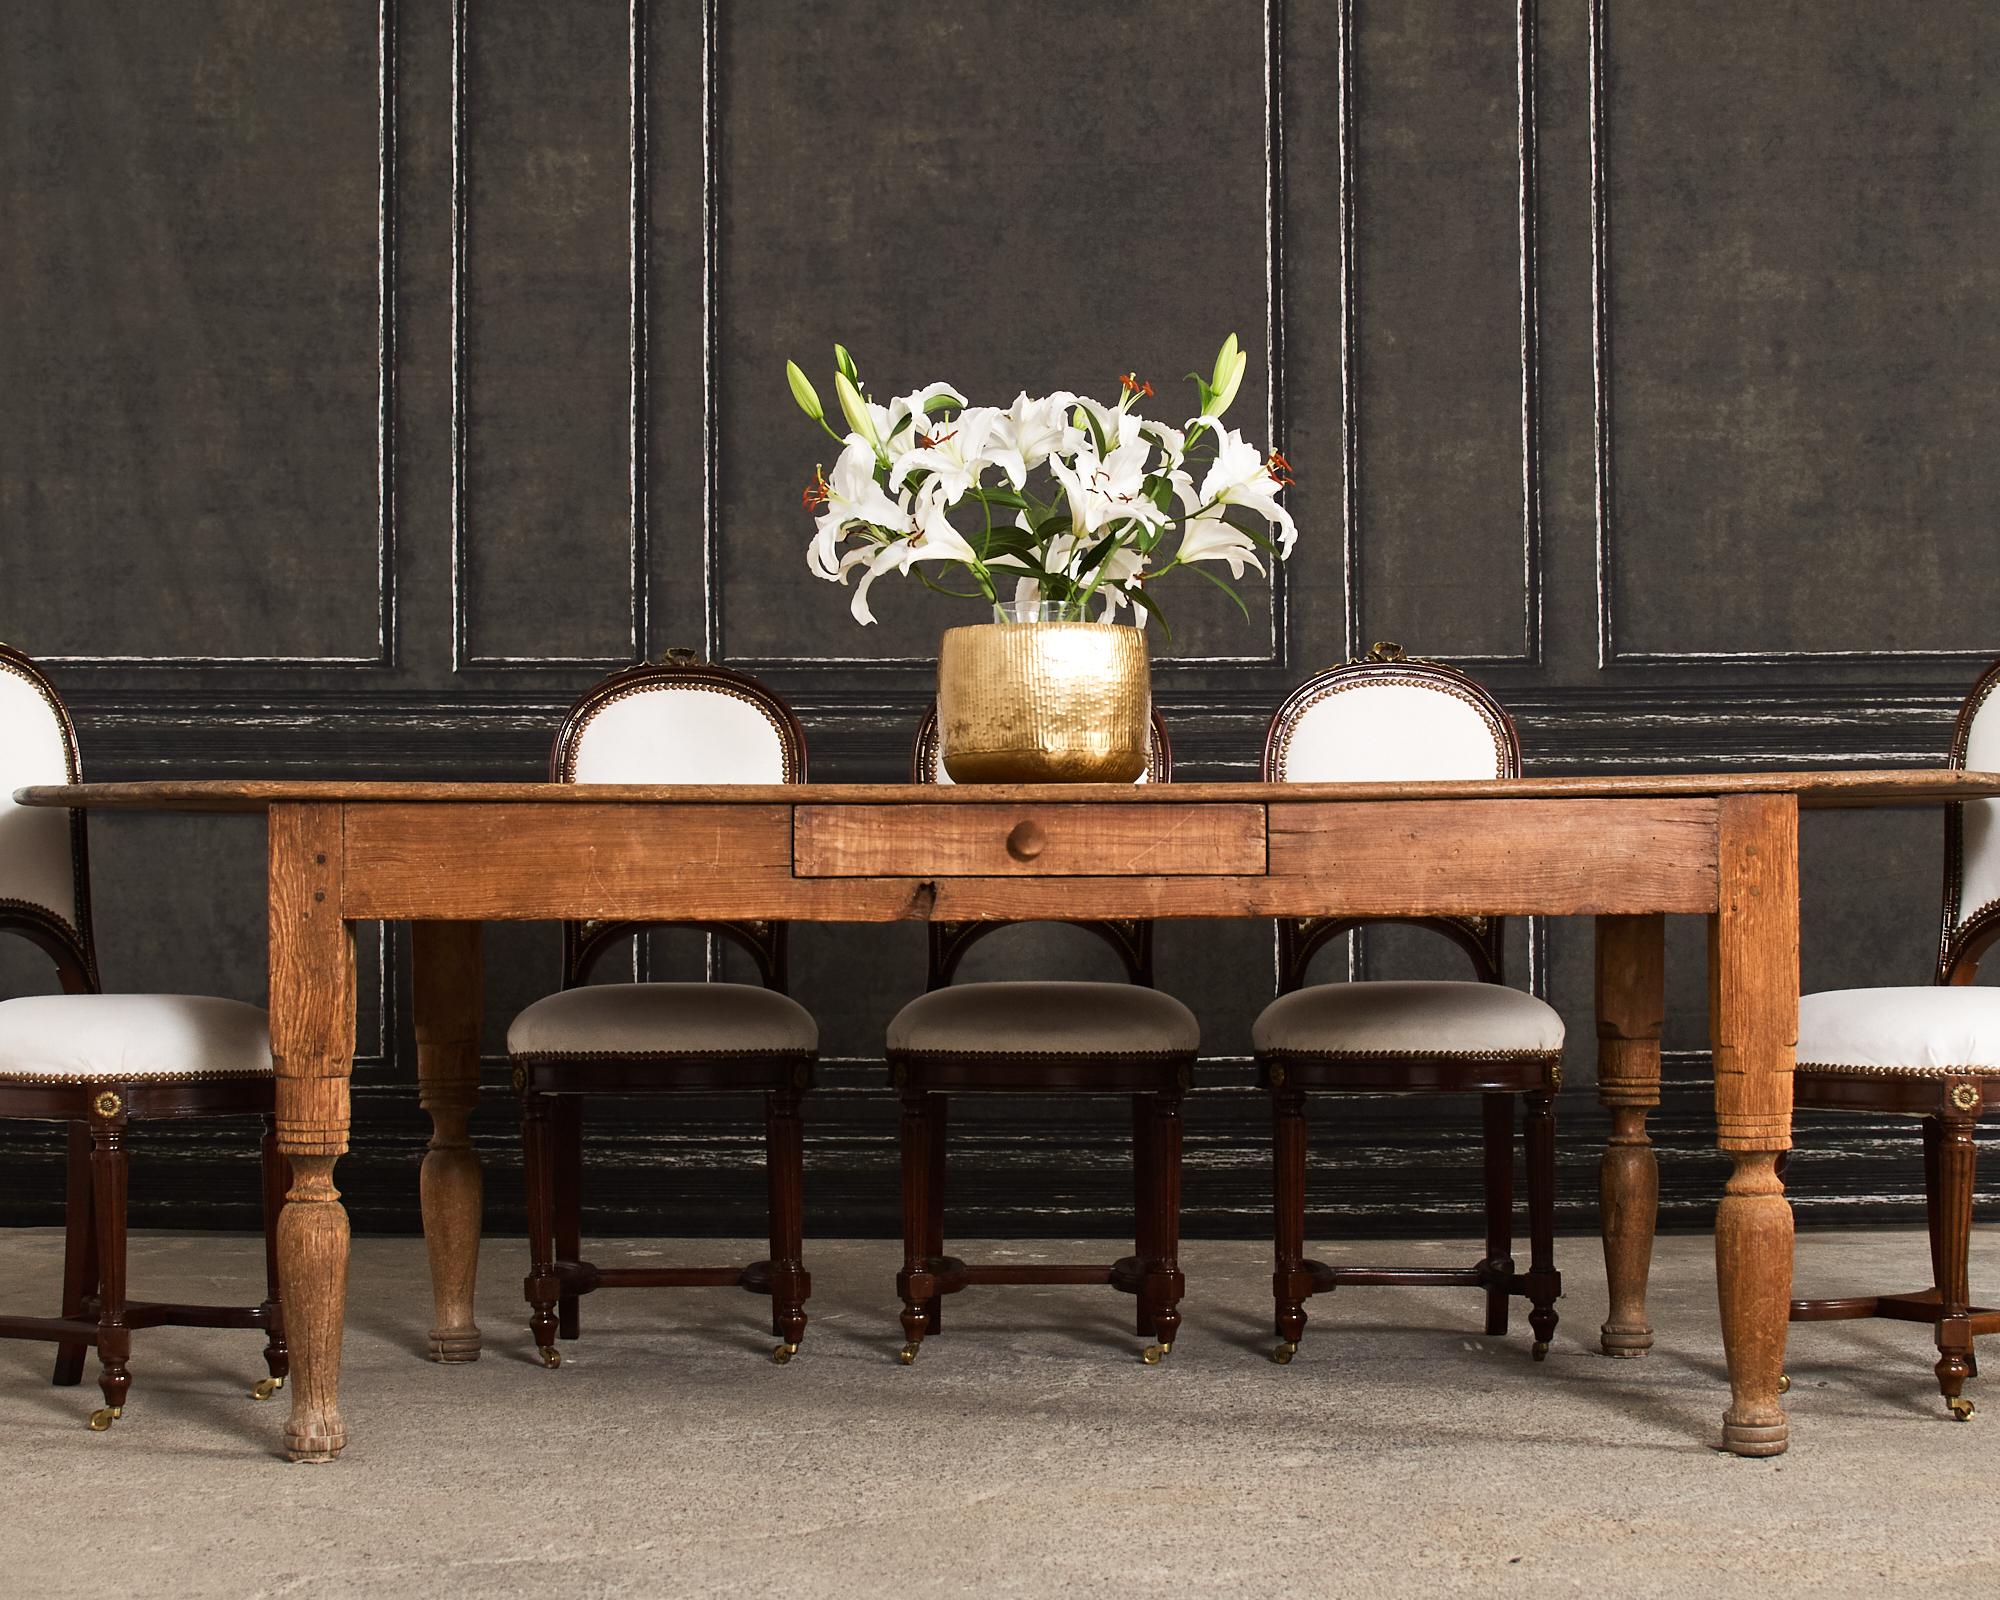 Weathered late 19th century country English provincial oval farmhouse dining table crafted from pine. The table features an oval top constructed with thick planks. The base has wood peg joinery with a small storage drawer on one side of the apron.